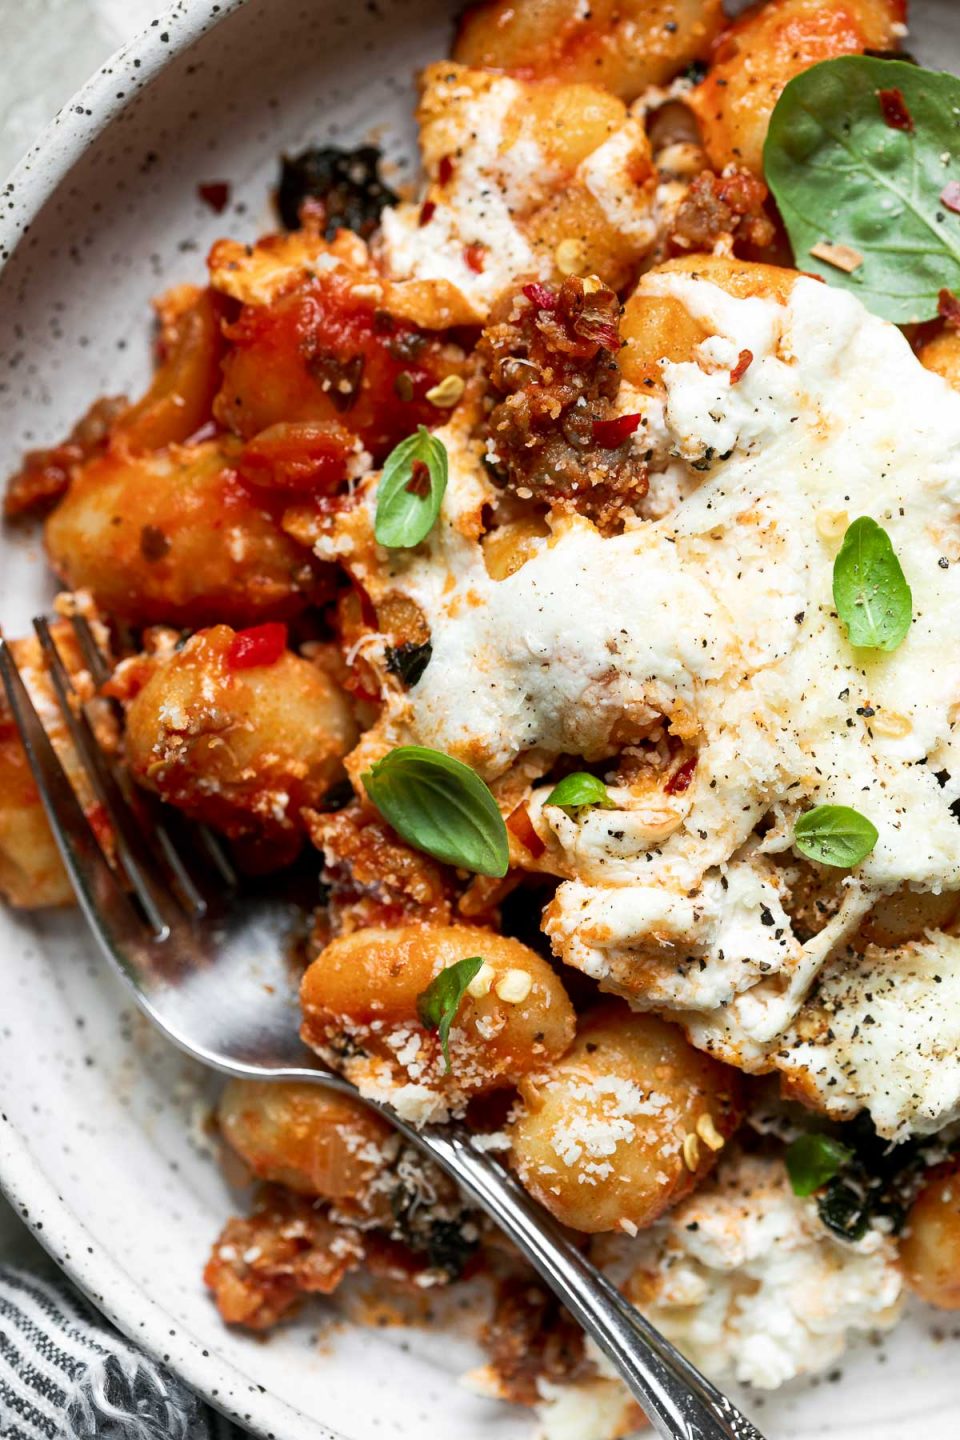 A close up of baked gnocchi shown on a speckled plate, topped with fresh basil & ground black pepper. A silver fork rests on the plate and a blue & white striped linen napkin rests alongside the plate.